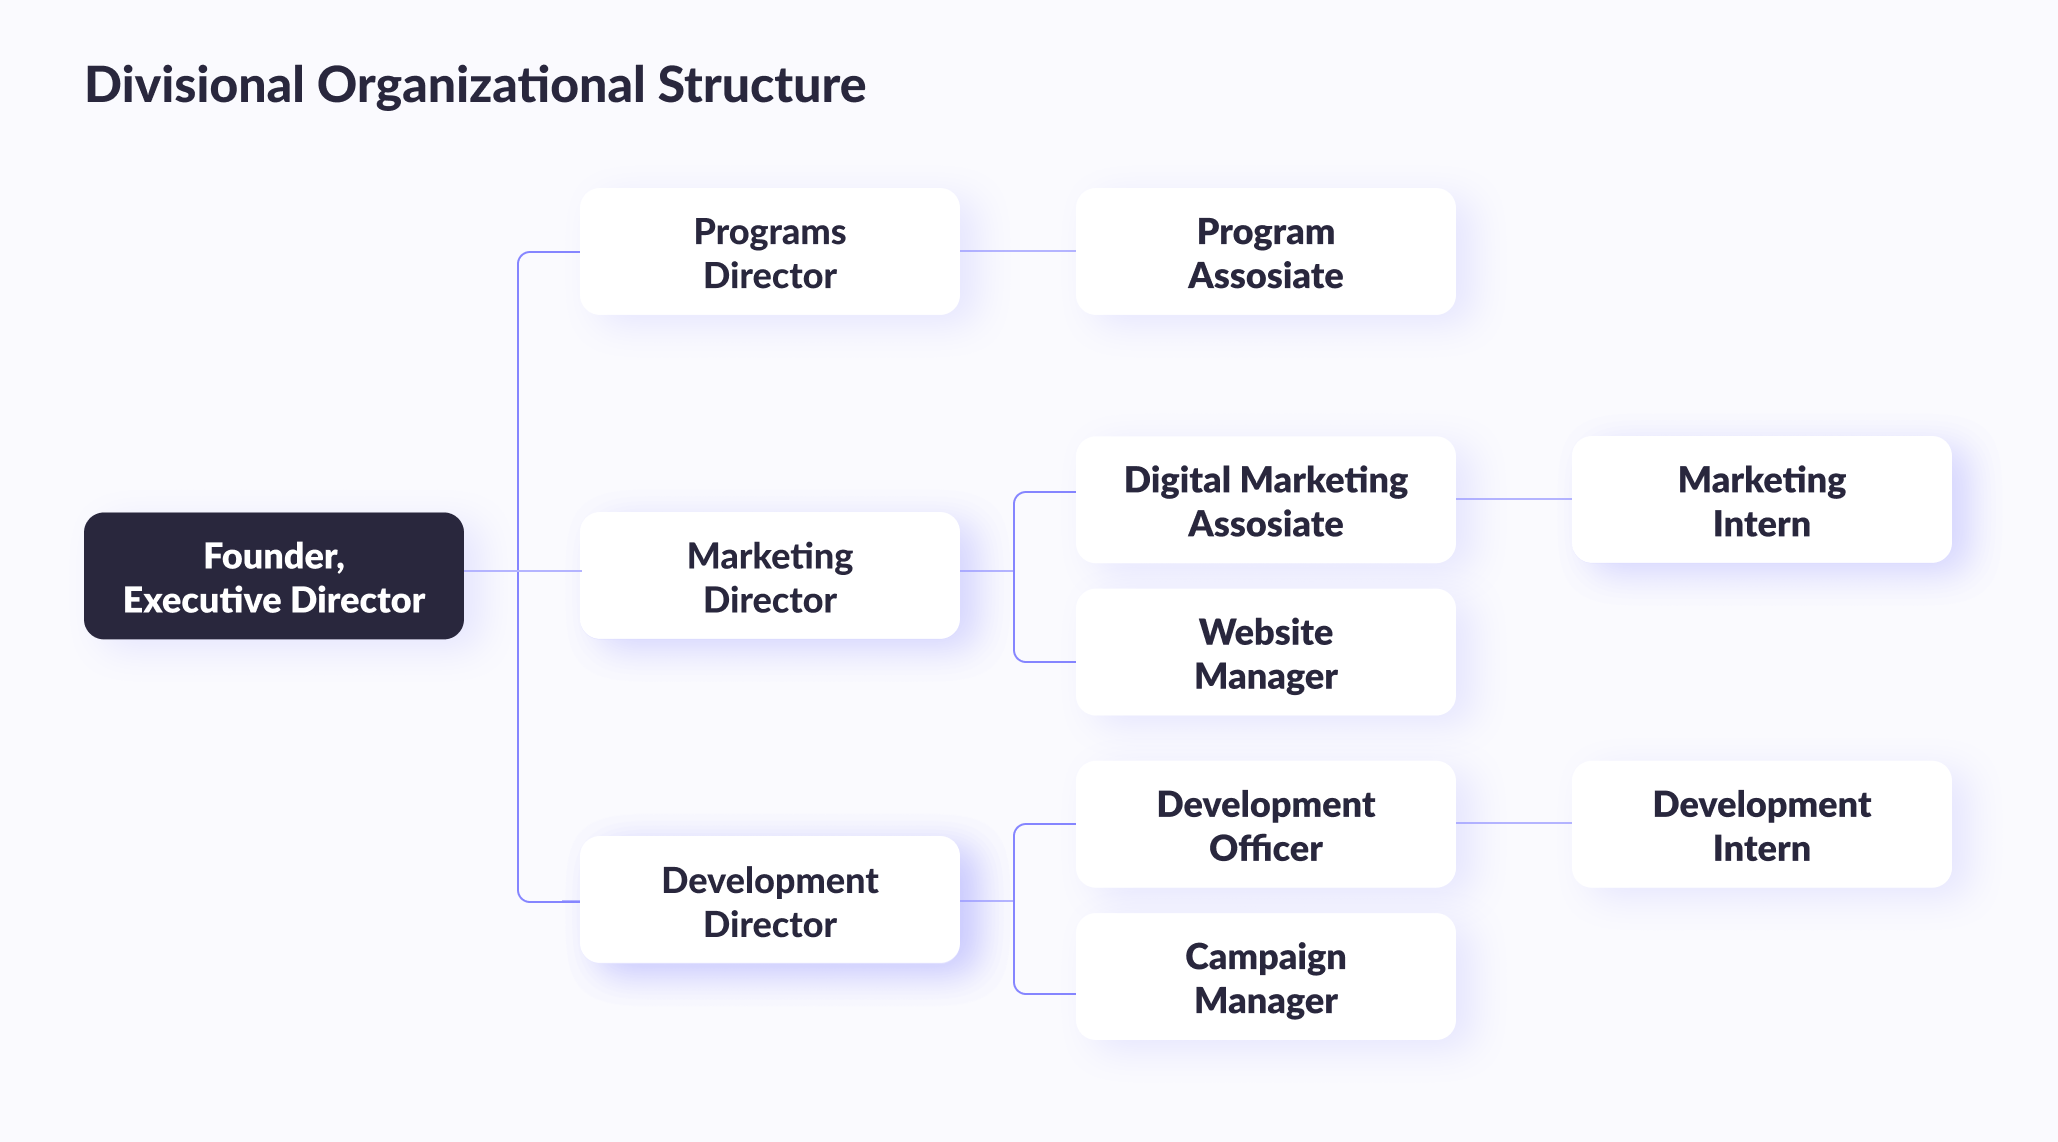 Divisional IT Organizational Structure